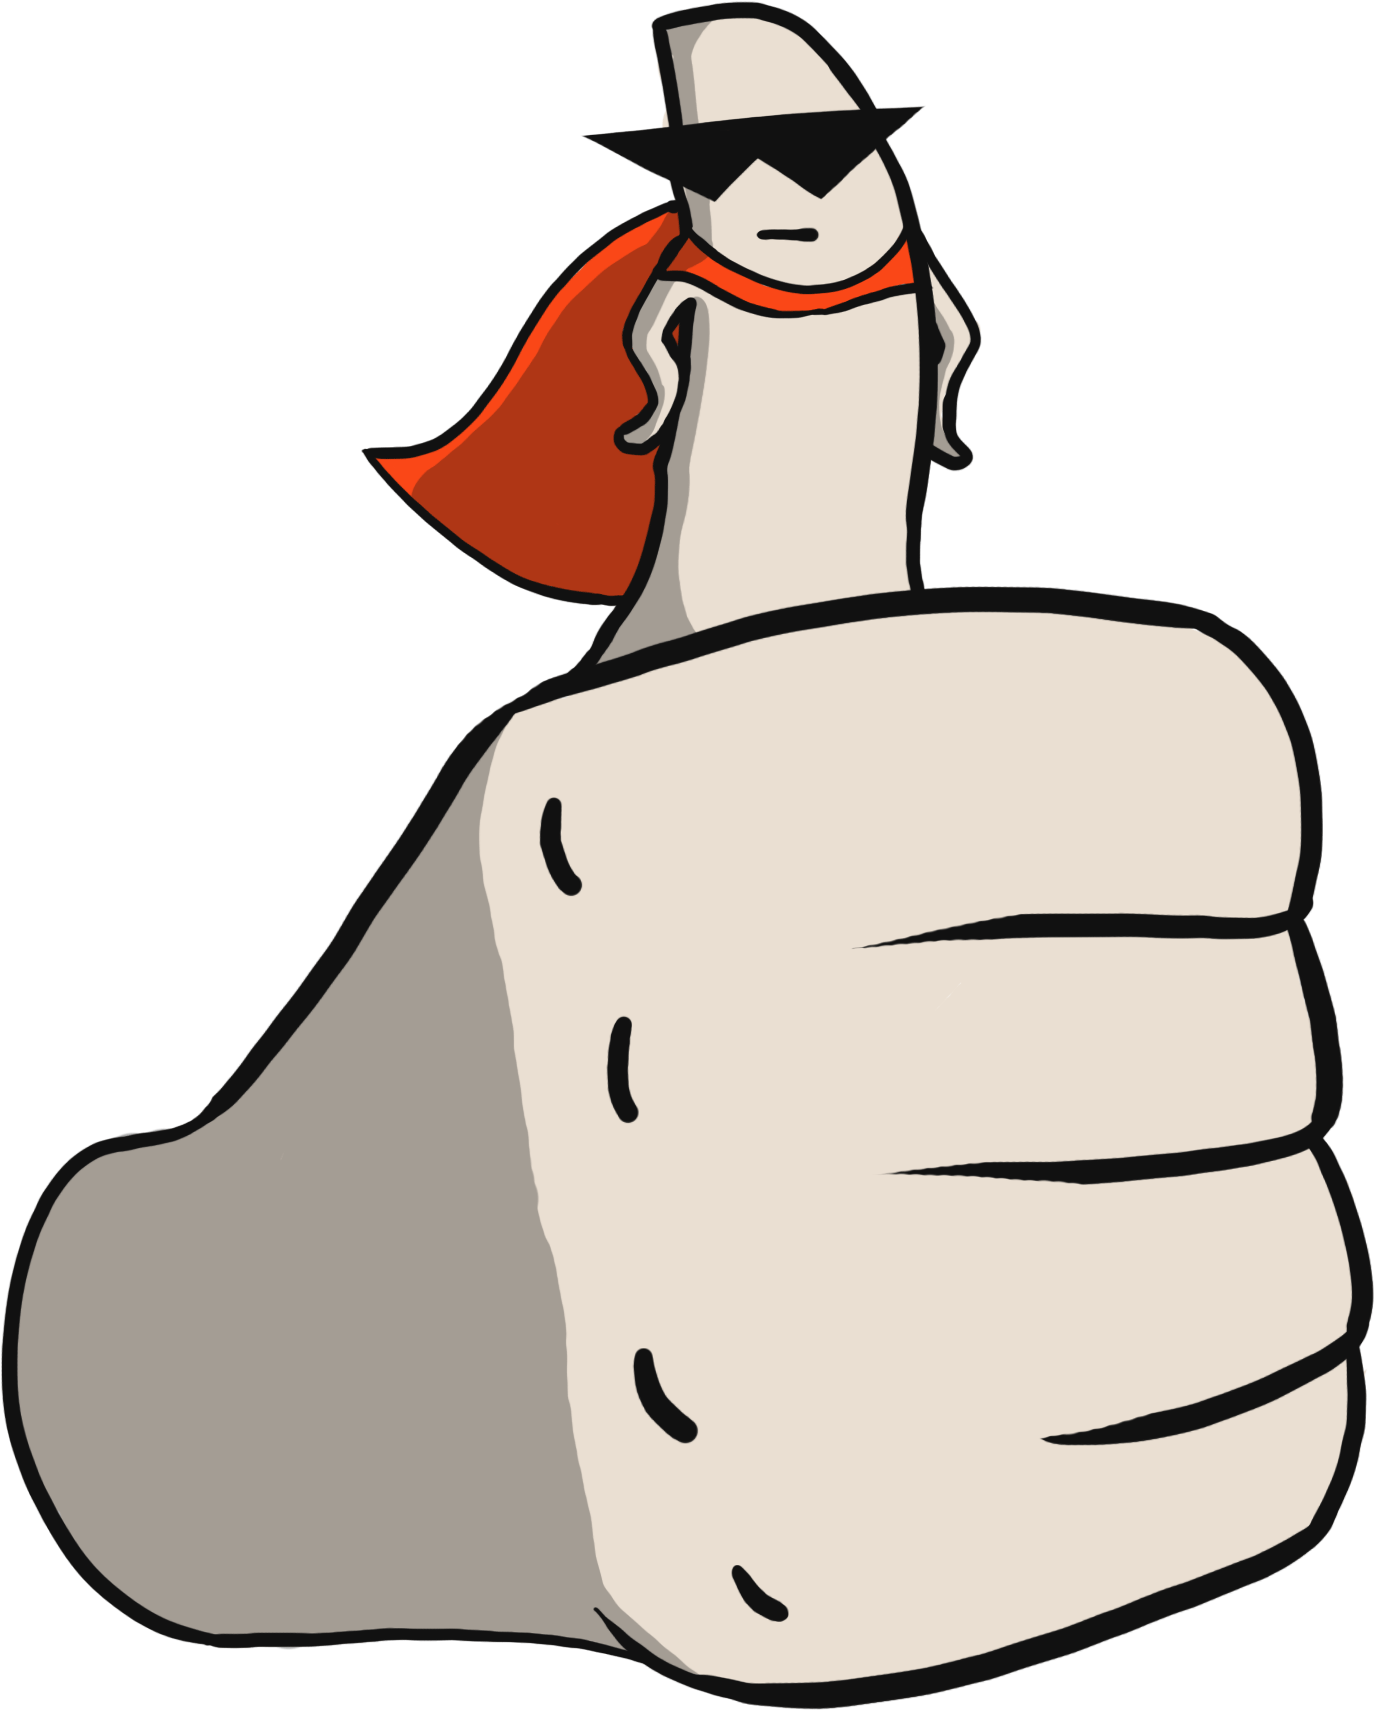 Thumbs Up Boy Clipart - Animated Gif Thumbs Up Clipart (2048x2048)